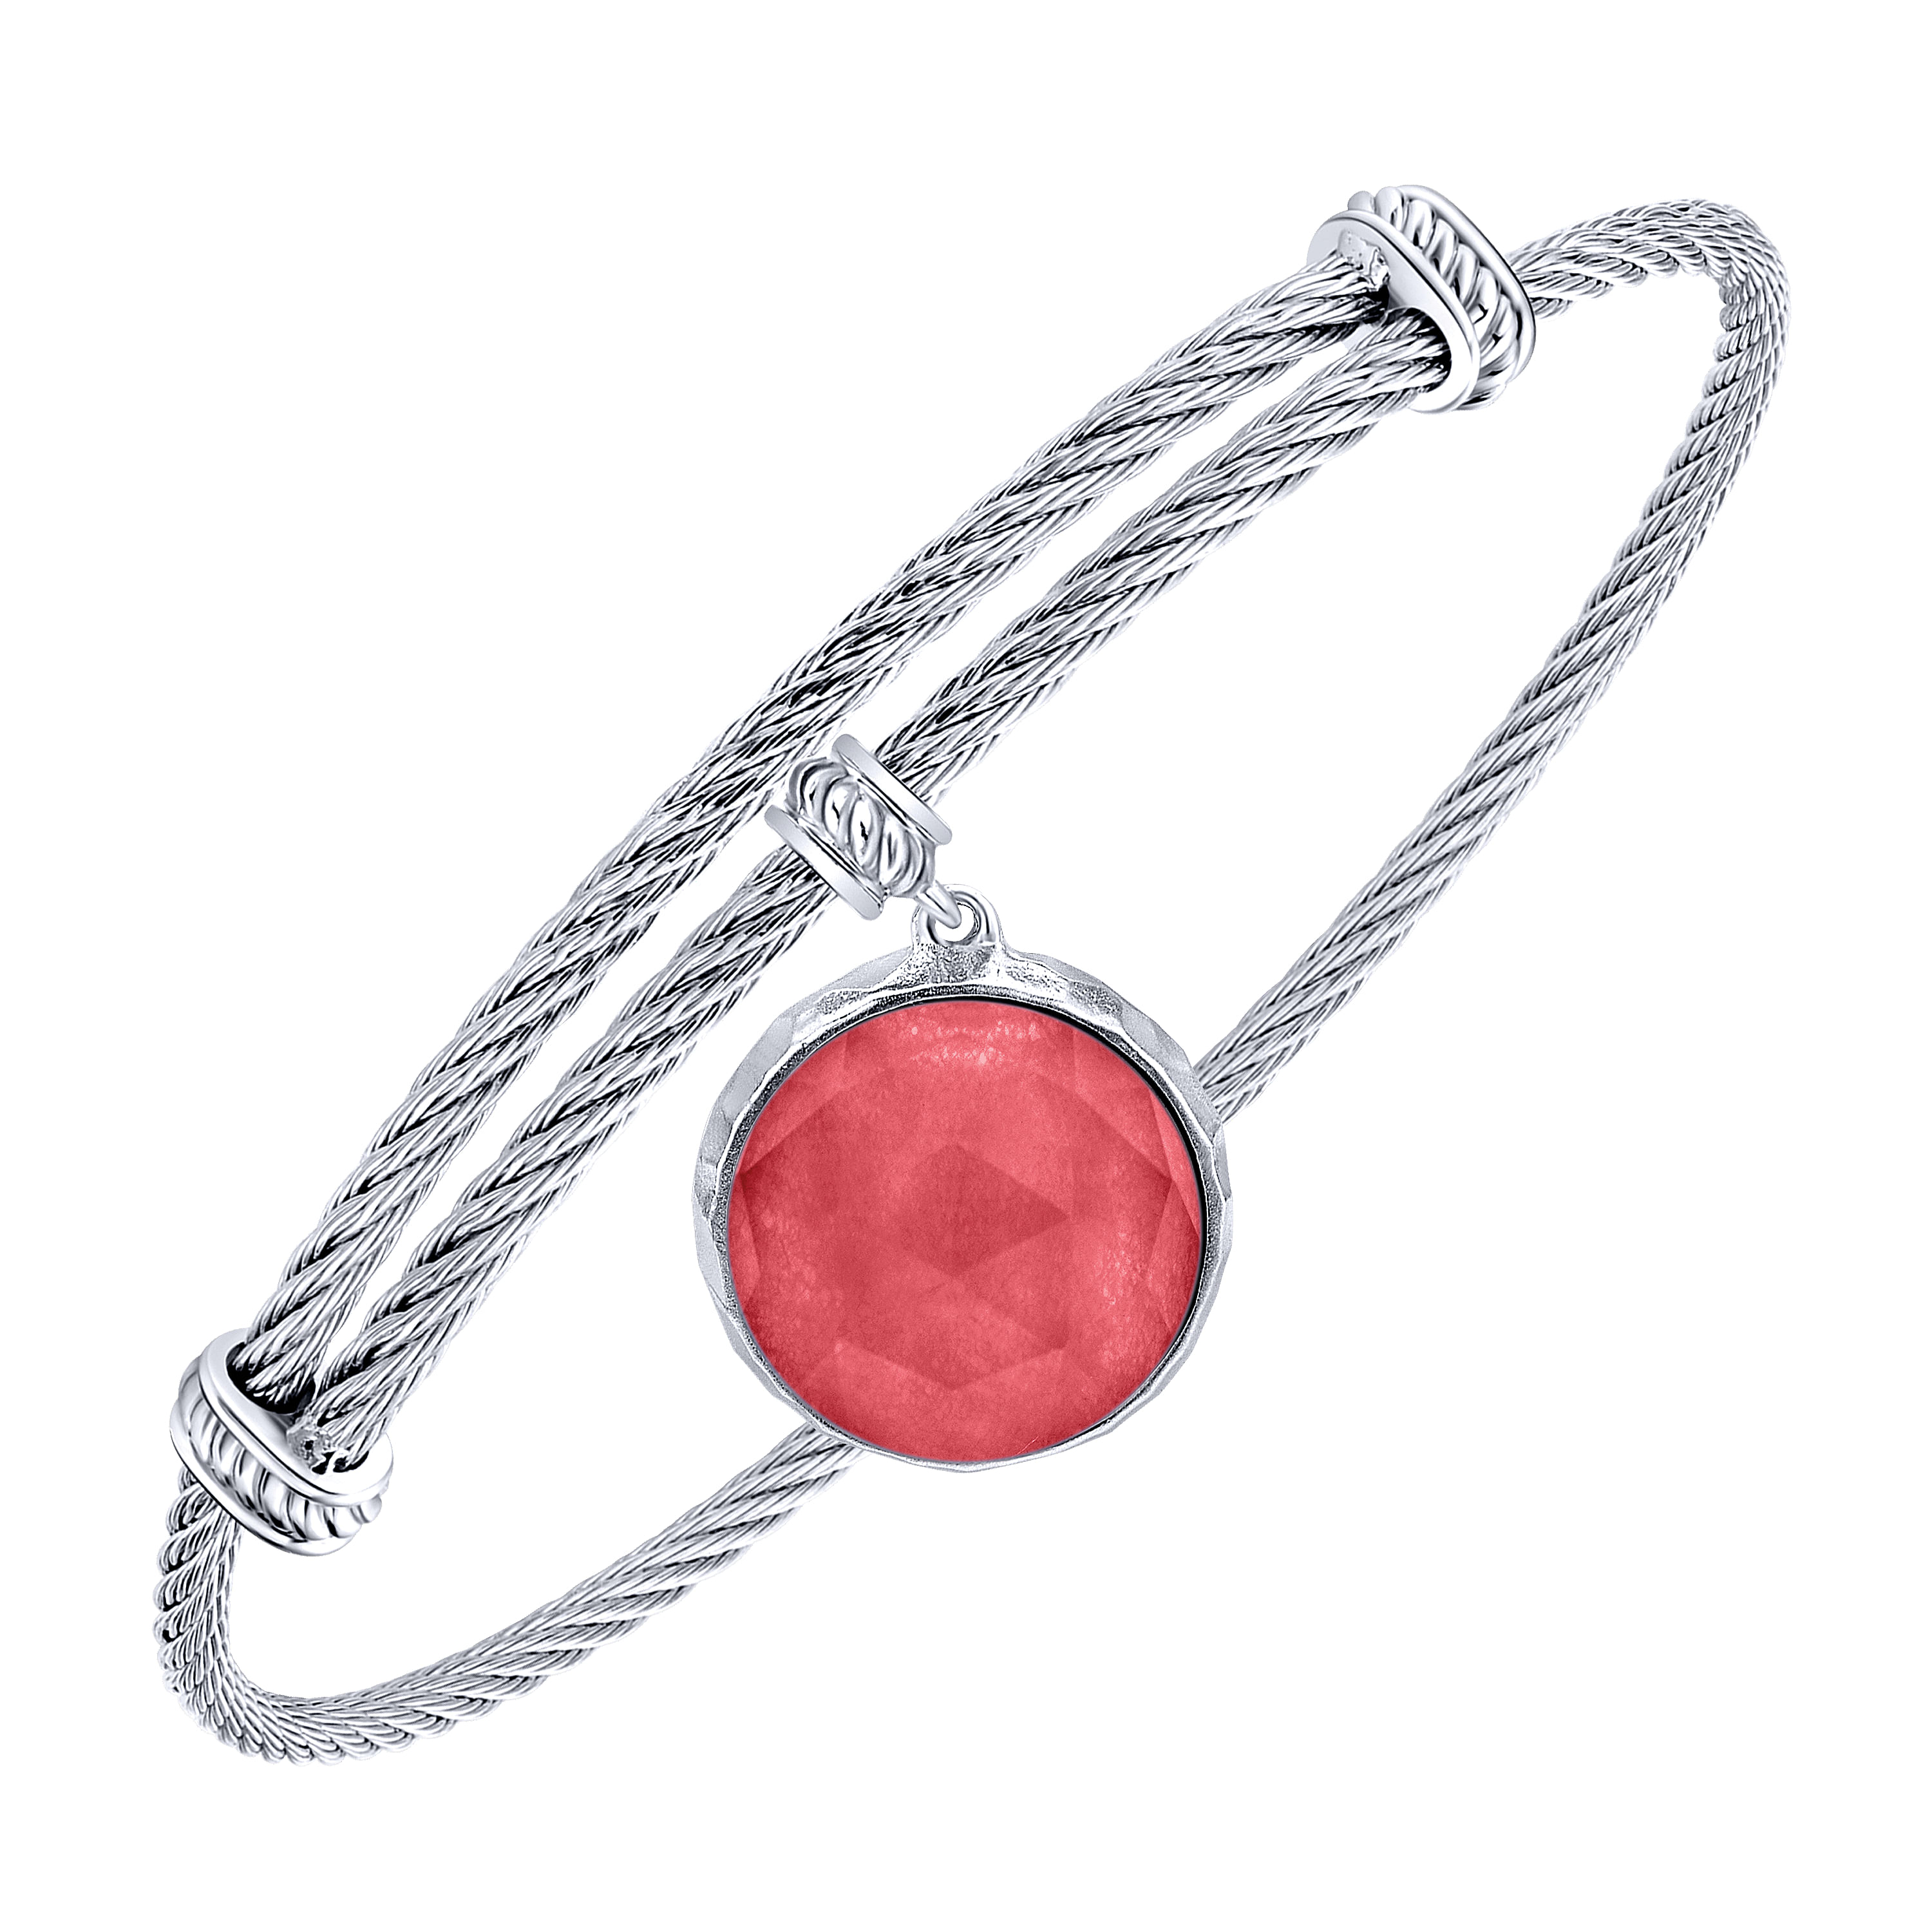 Adjustable Twisted Cable Stainless Steel Bangle with Round Sterling Silver Rock Crystal/Red Jade Charm